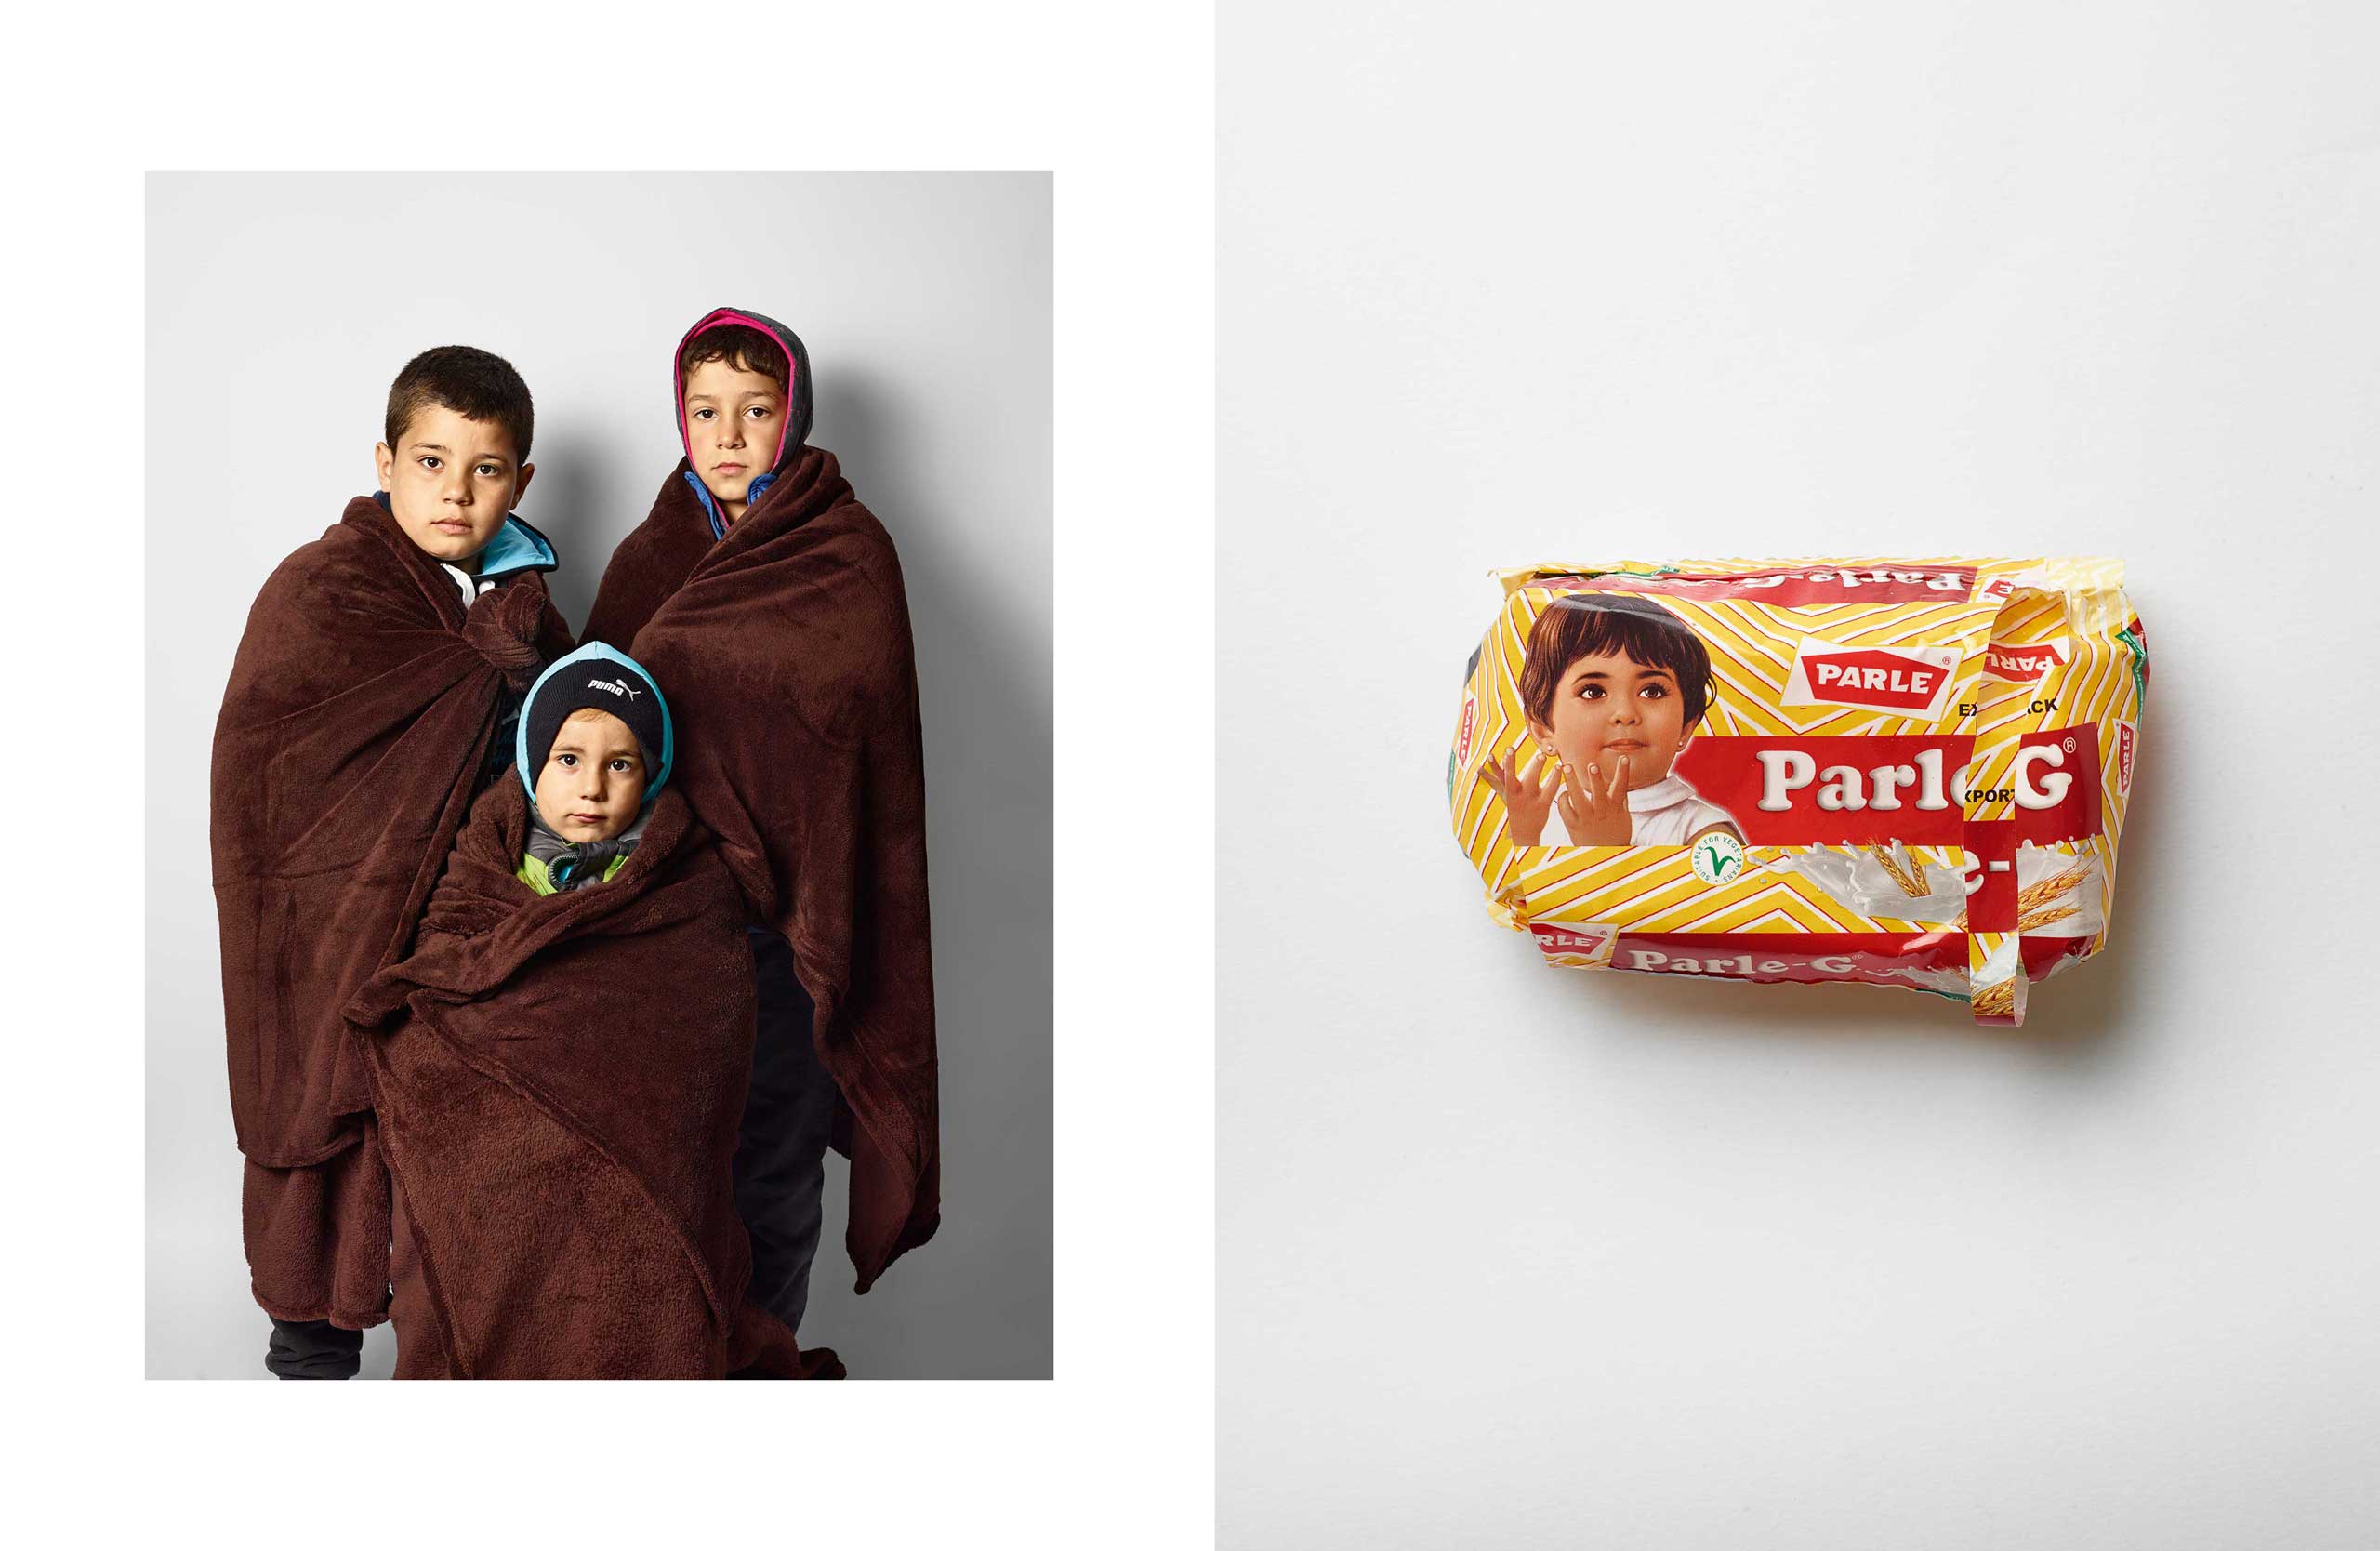 (from left back) Kader, 9, and Muhammed, 10 with (front) Caesar,
                               3, from Syria; “We came on a boat. We don’t have anything. They gave us these biscuits here. Traveling
                               with children is hard.” — the boys’ mother, Shakrea, 26